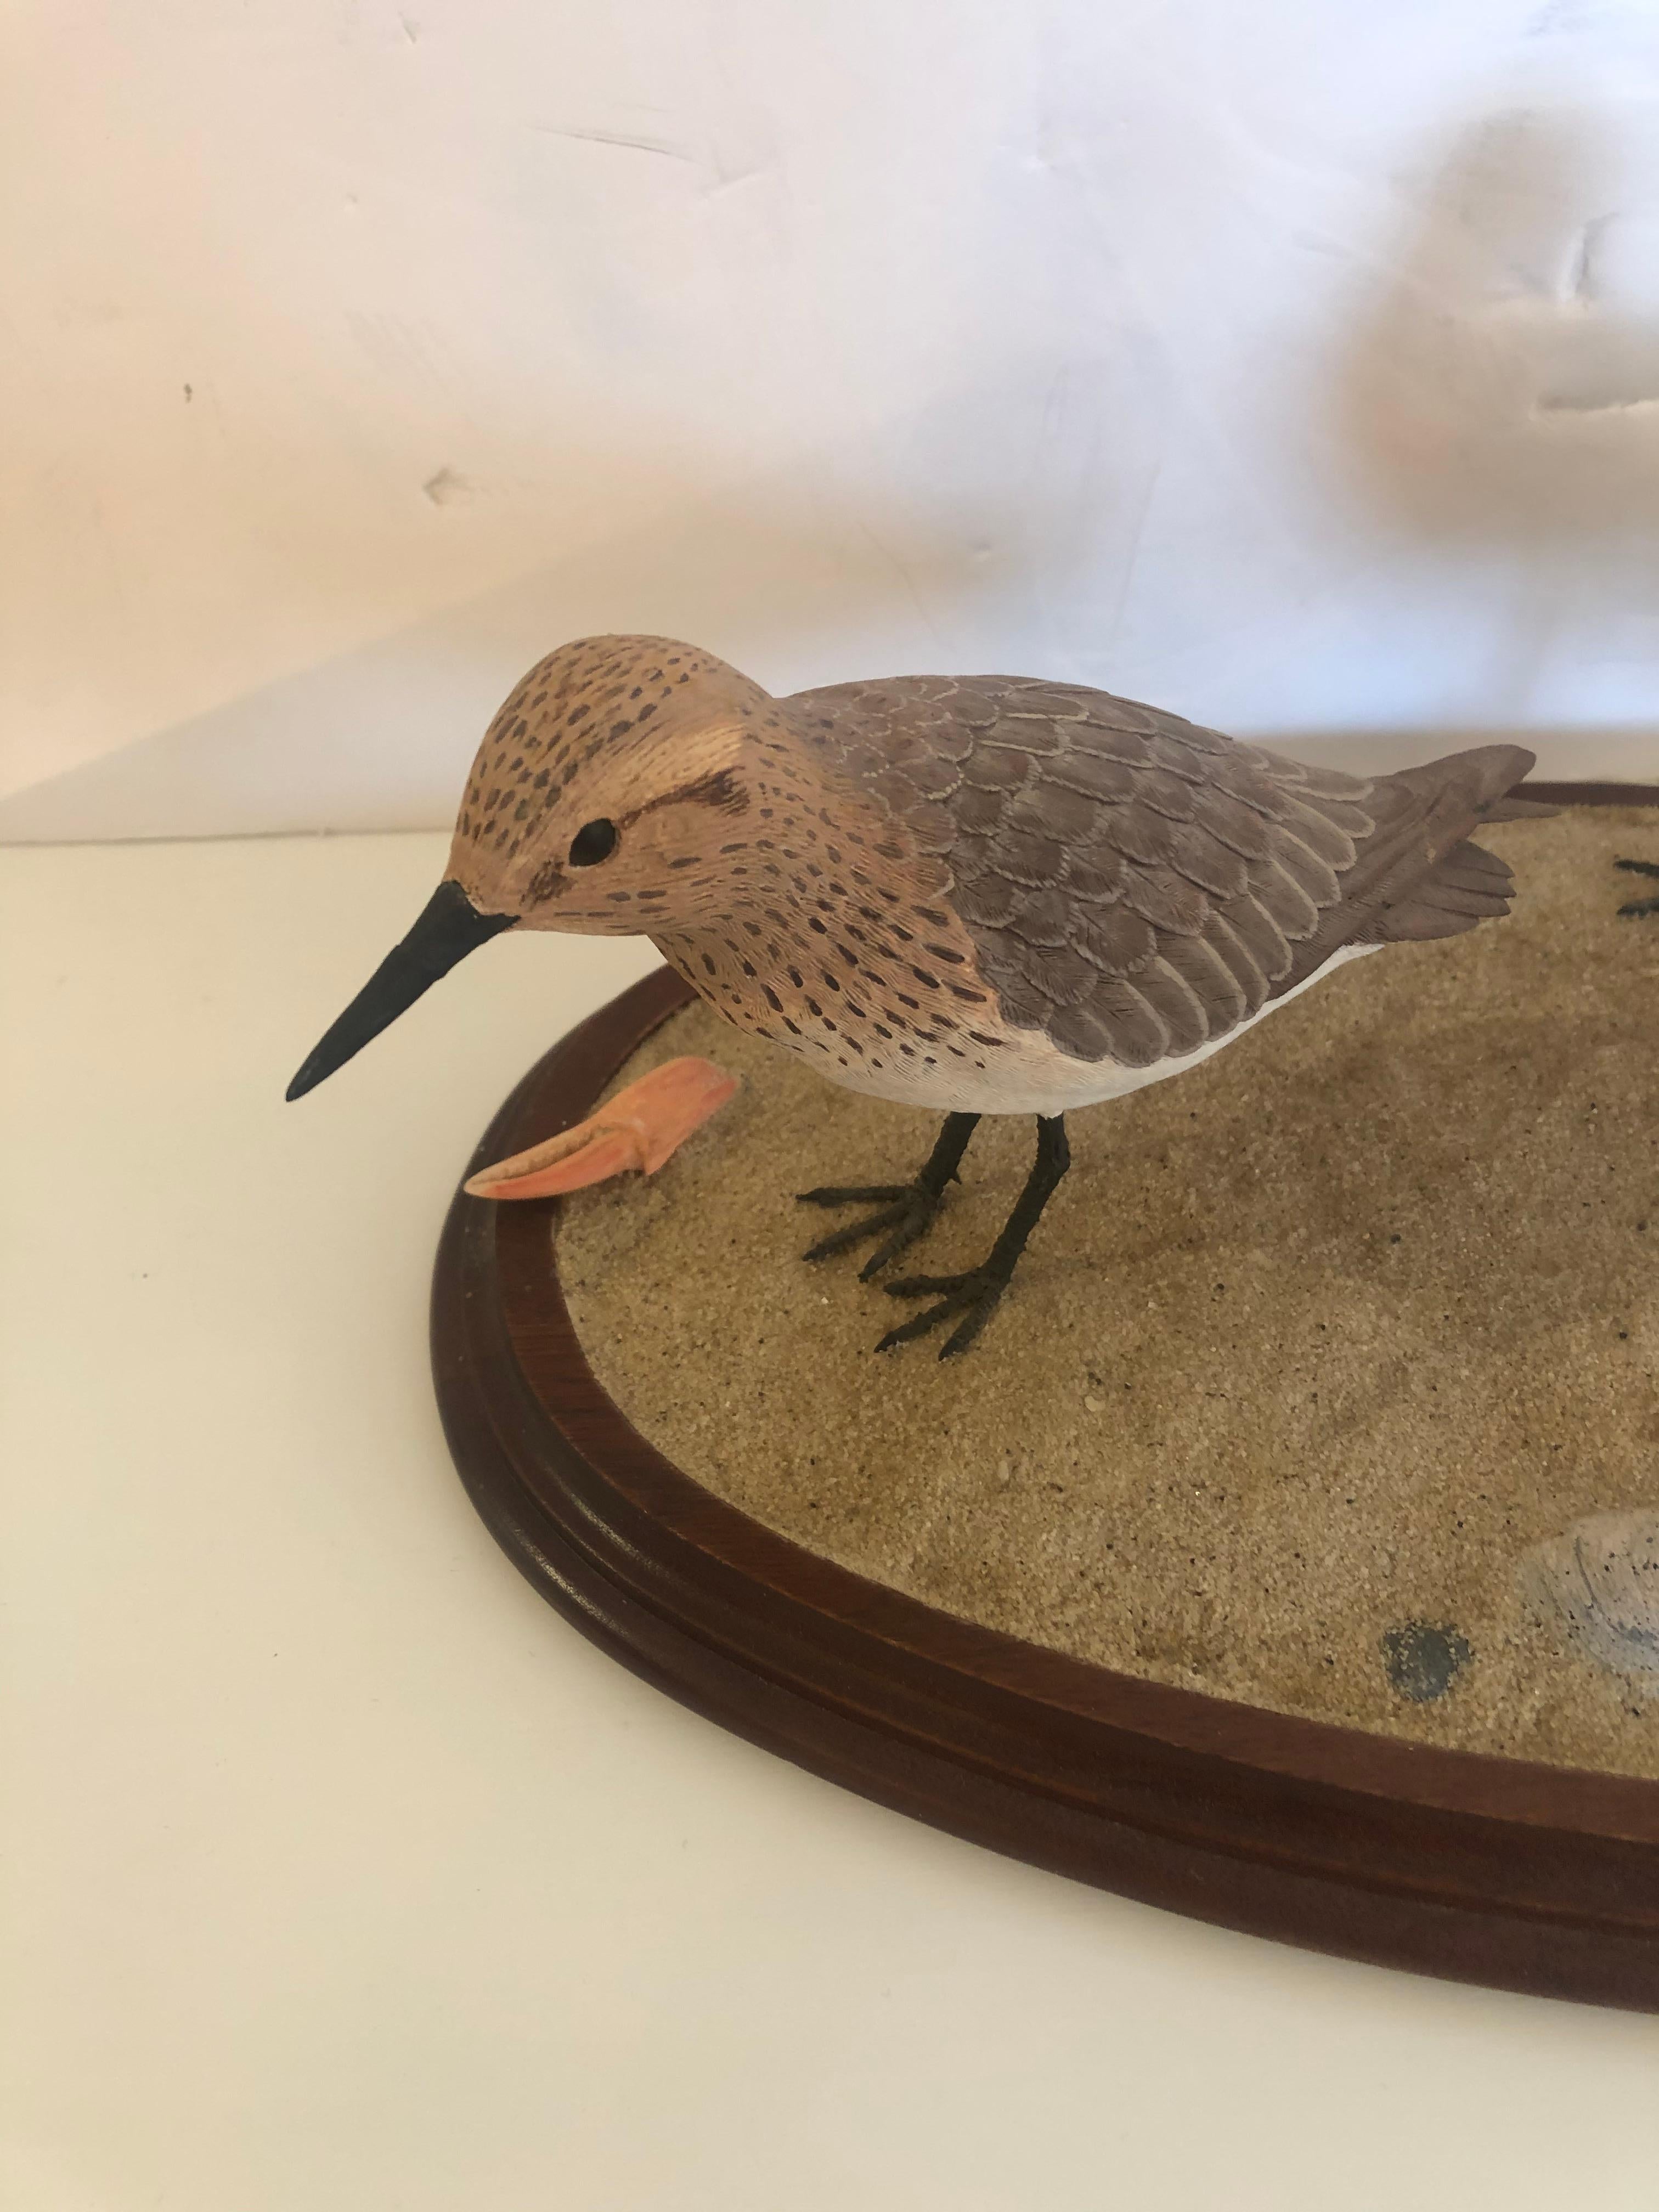 Beautiful hand artisan made sculpture of 3 life like sandpipers on oval wooden platform having sand and shells. Perfect for a stylish beach house, or a reminder of summer days in any house.
Signed on the back '87 J S Meyer.